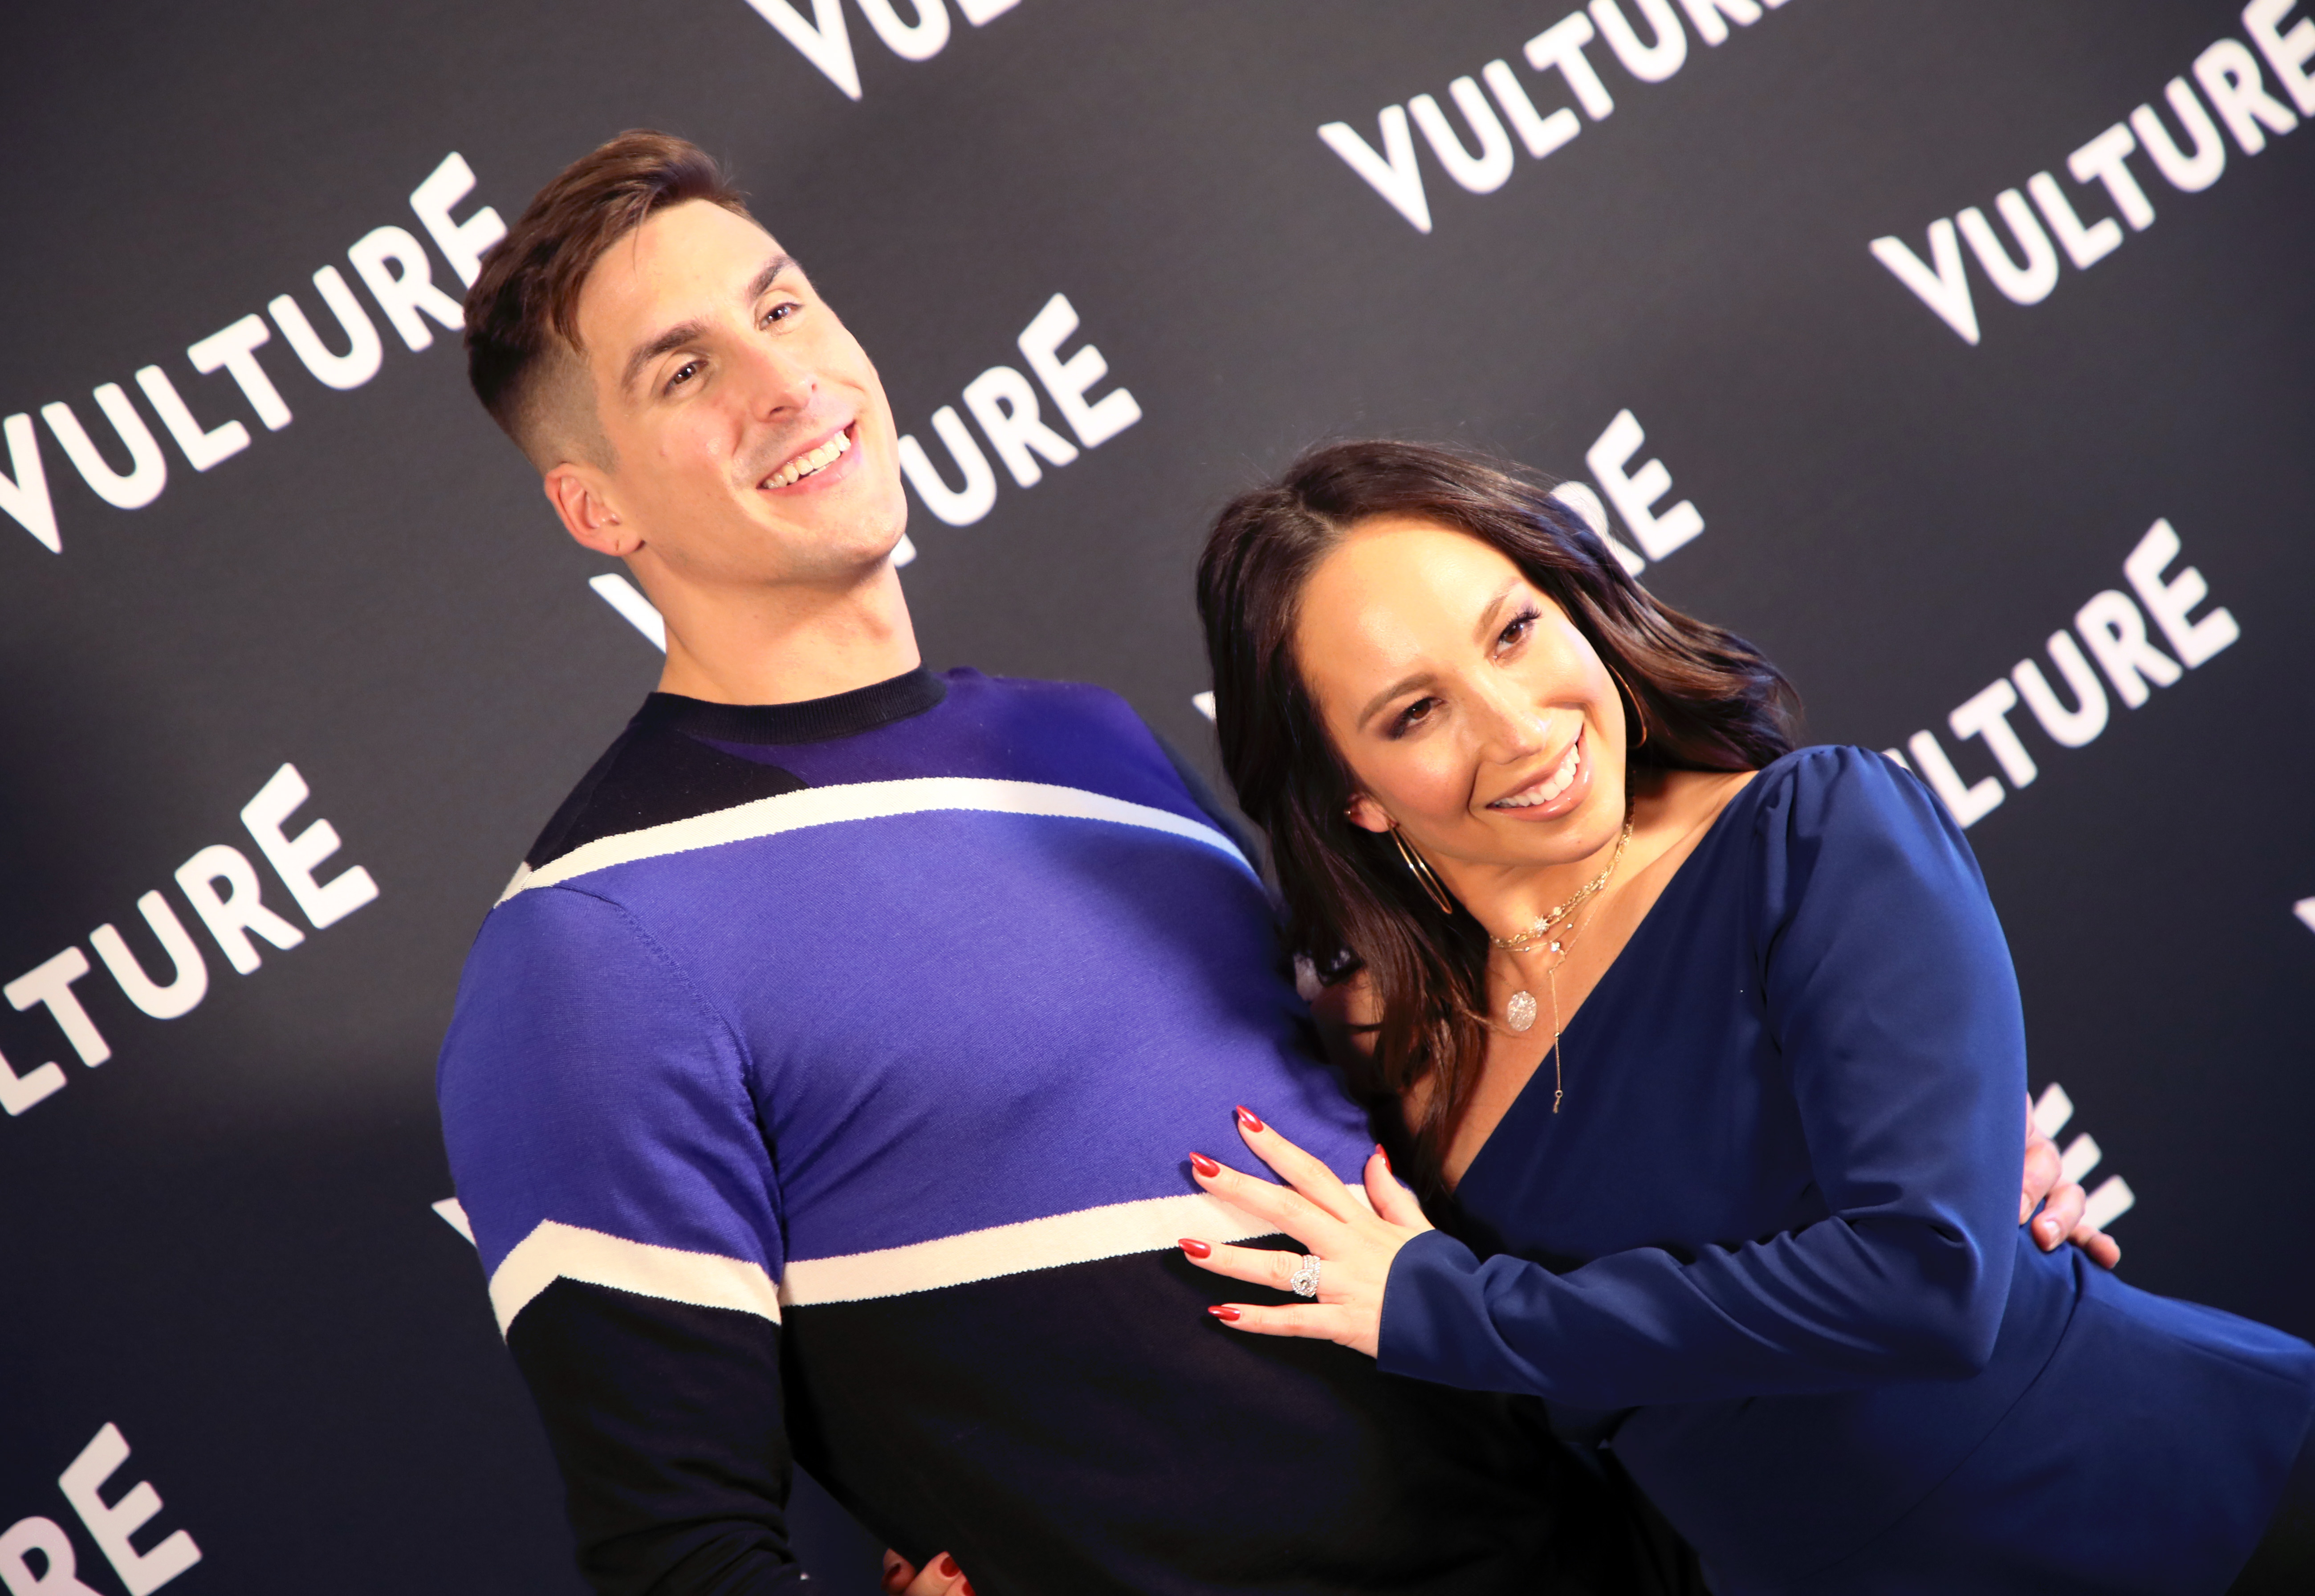 Cody Rigsby and Cheryl Burke attend the 2021 Vulture Fest